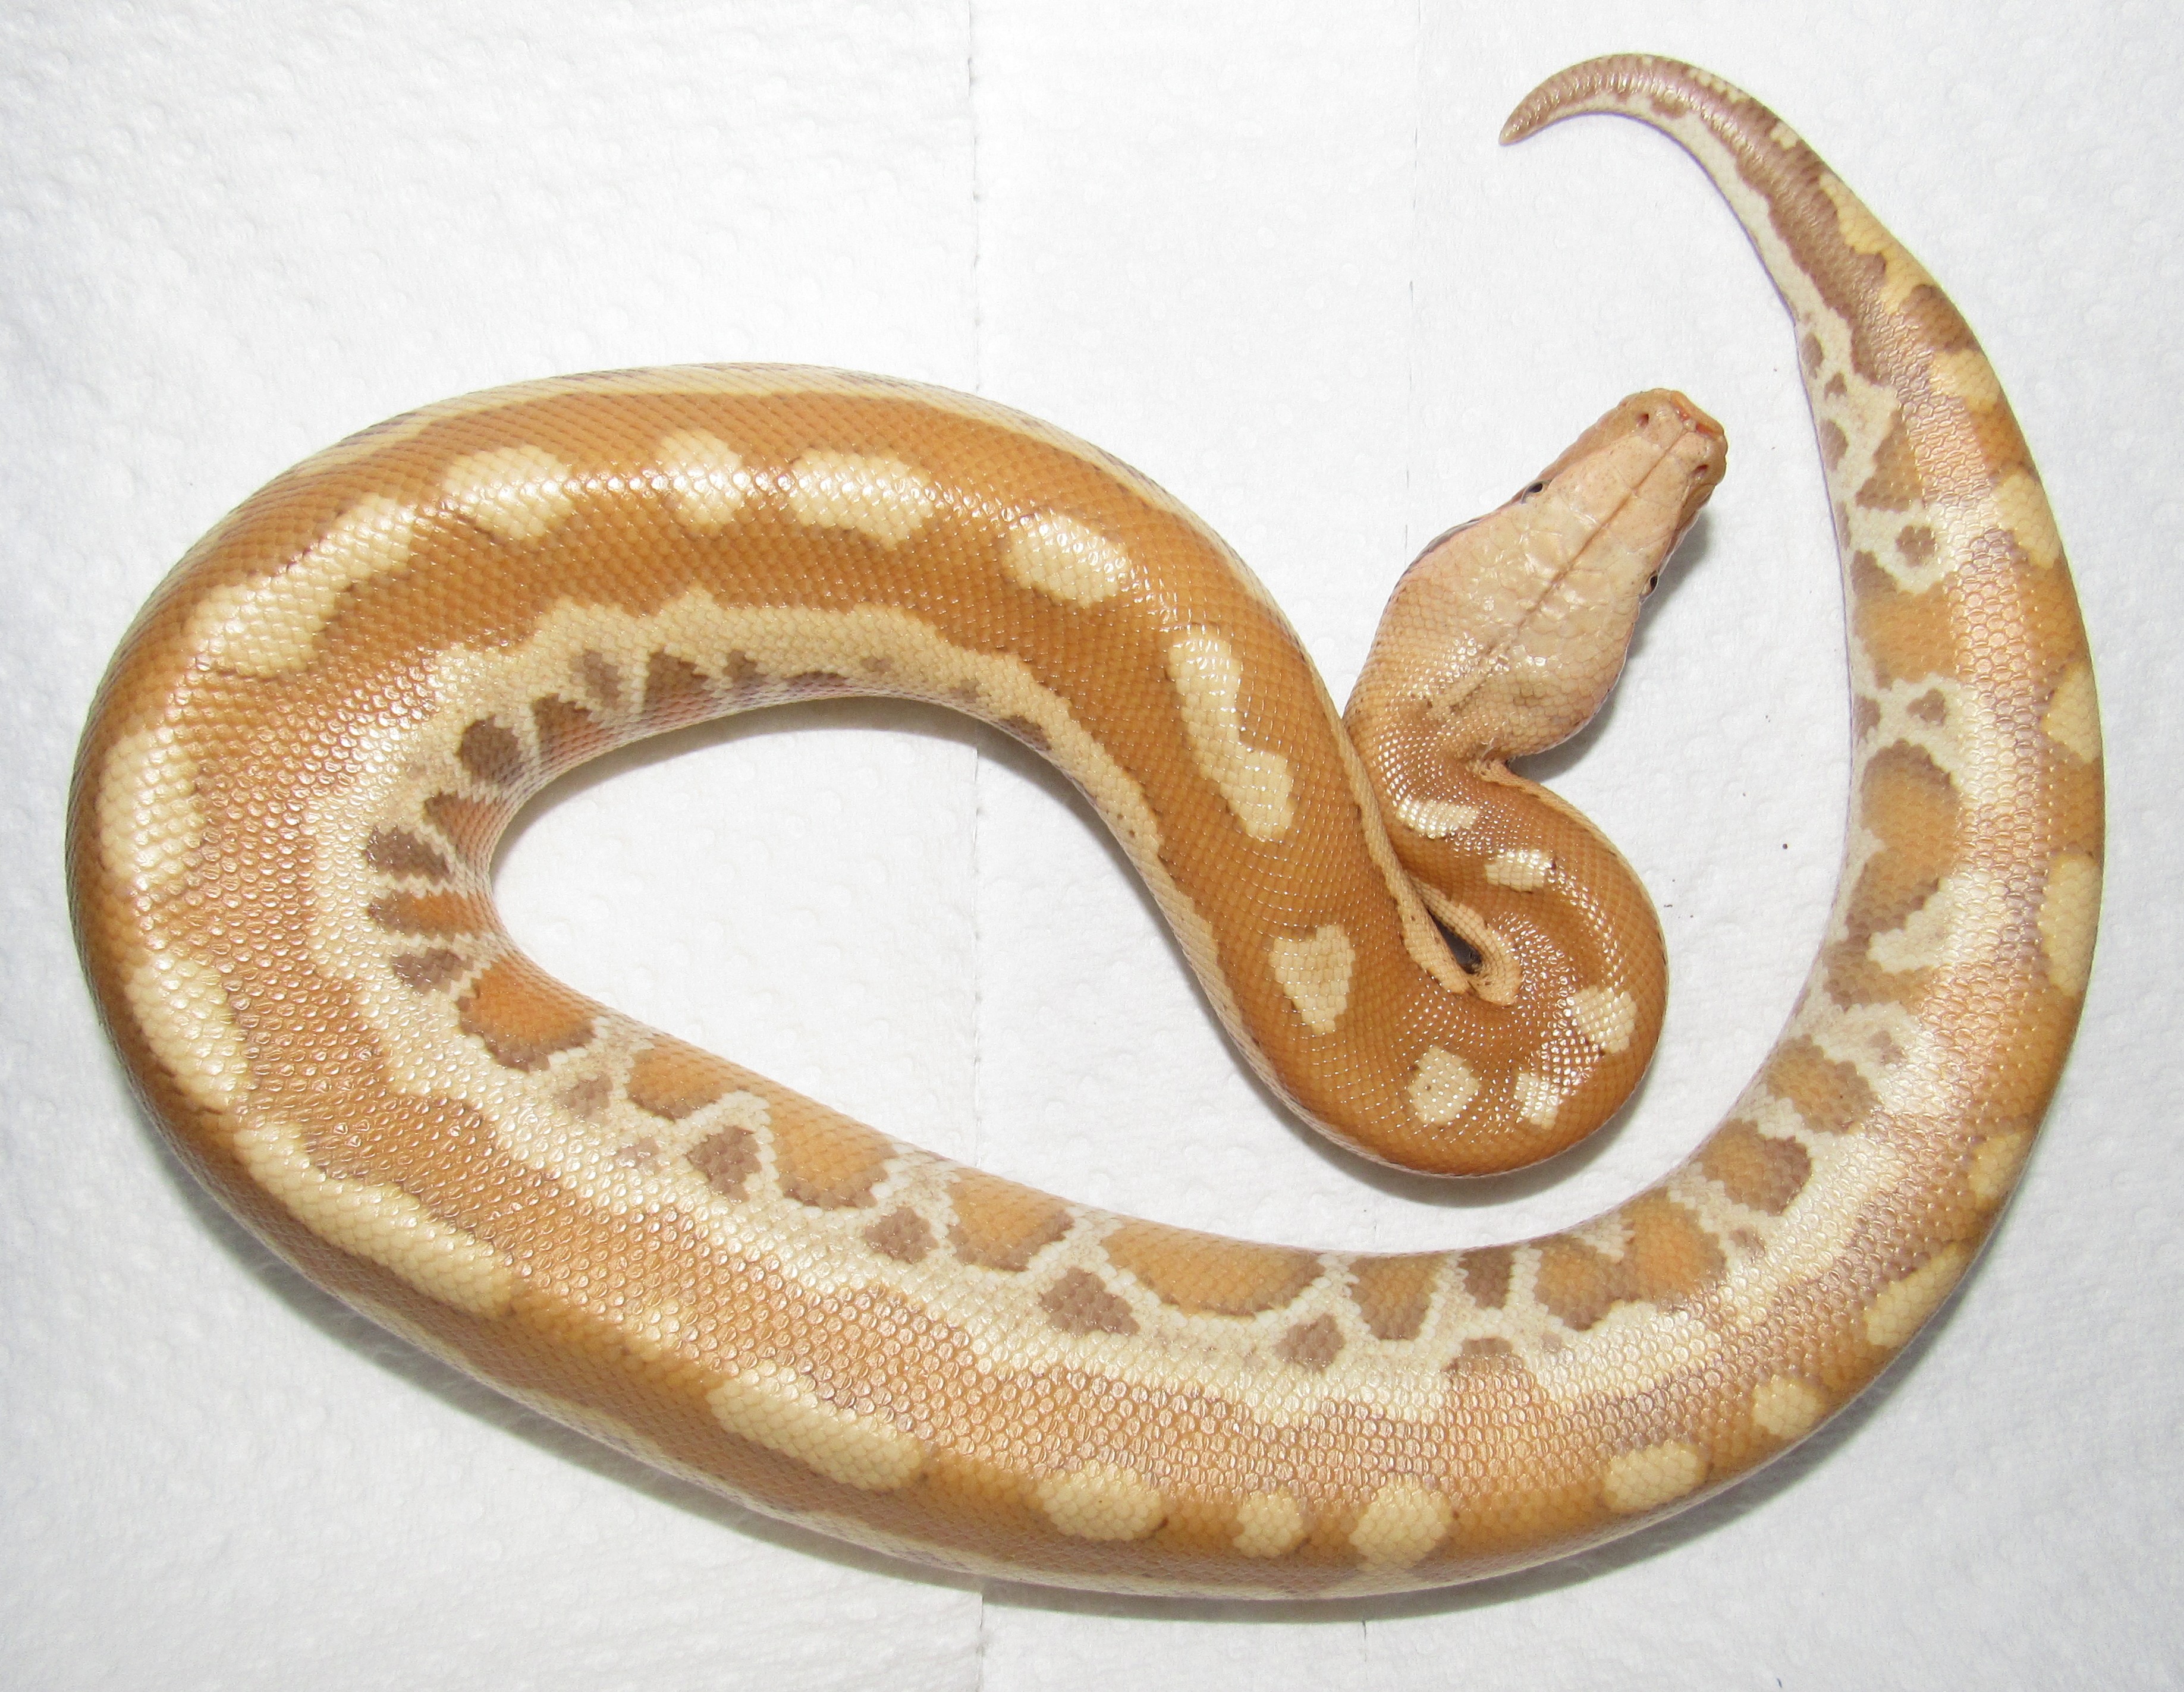 T+ Albino Blood Python by Wallflower Herpetoculture